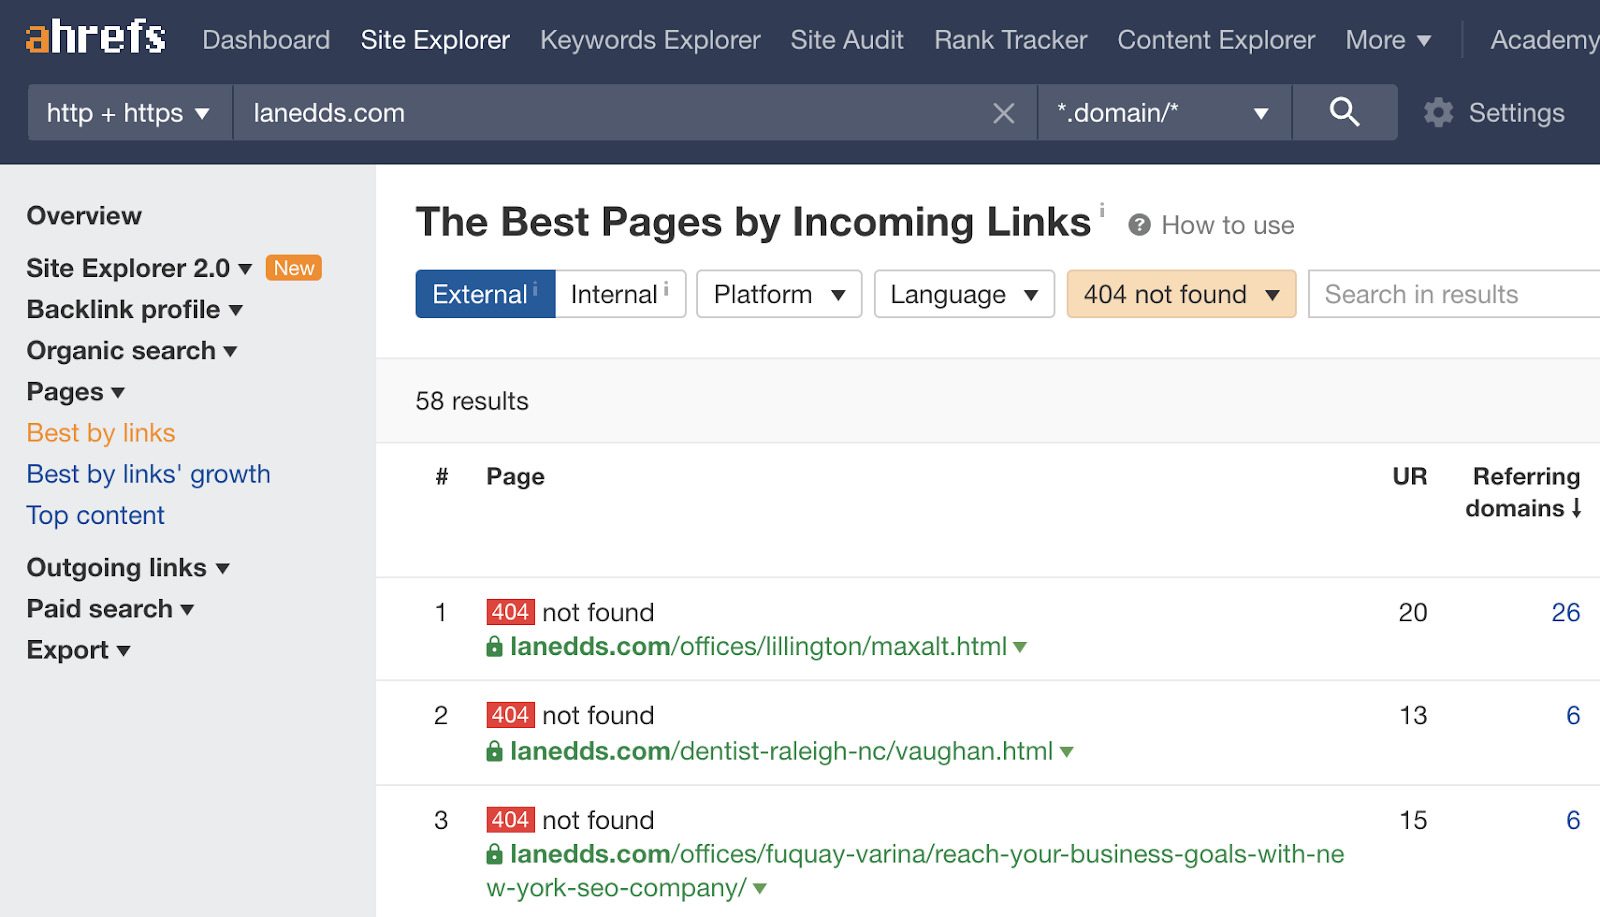 404s with links in the Best by links report that you can redirect